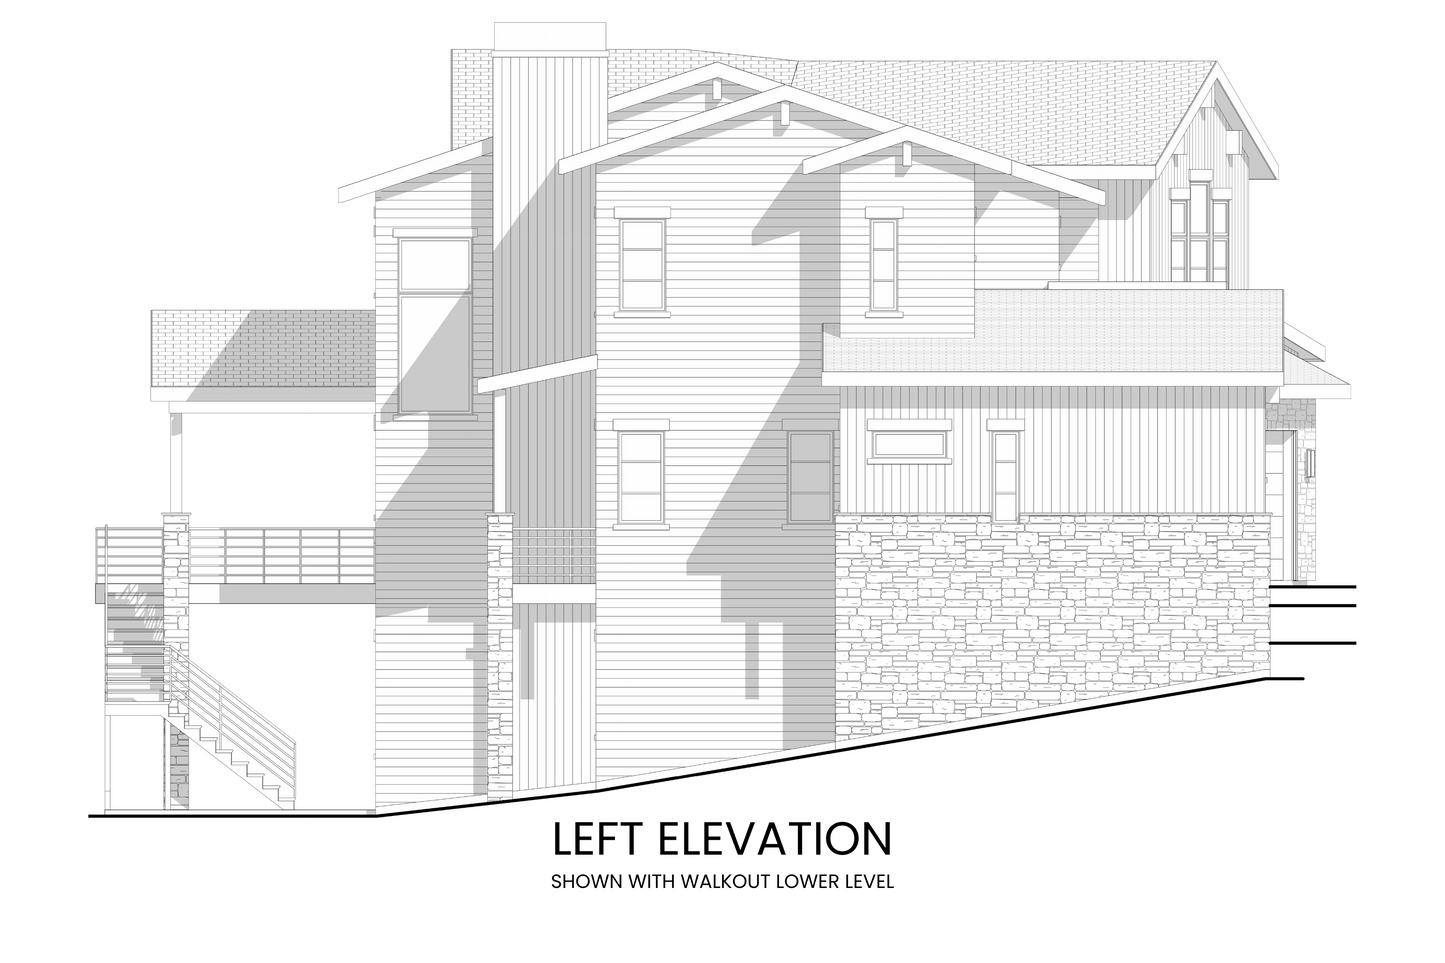 Modern-House-Plan-with-Four-Bedrooms-Left-Elevation-Rocky-Mountain-Plan-Company-Citadel-Peaks